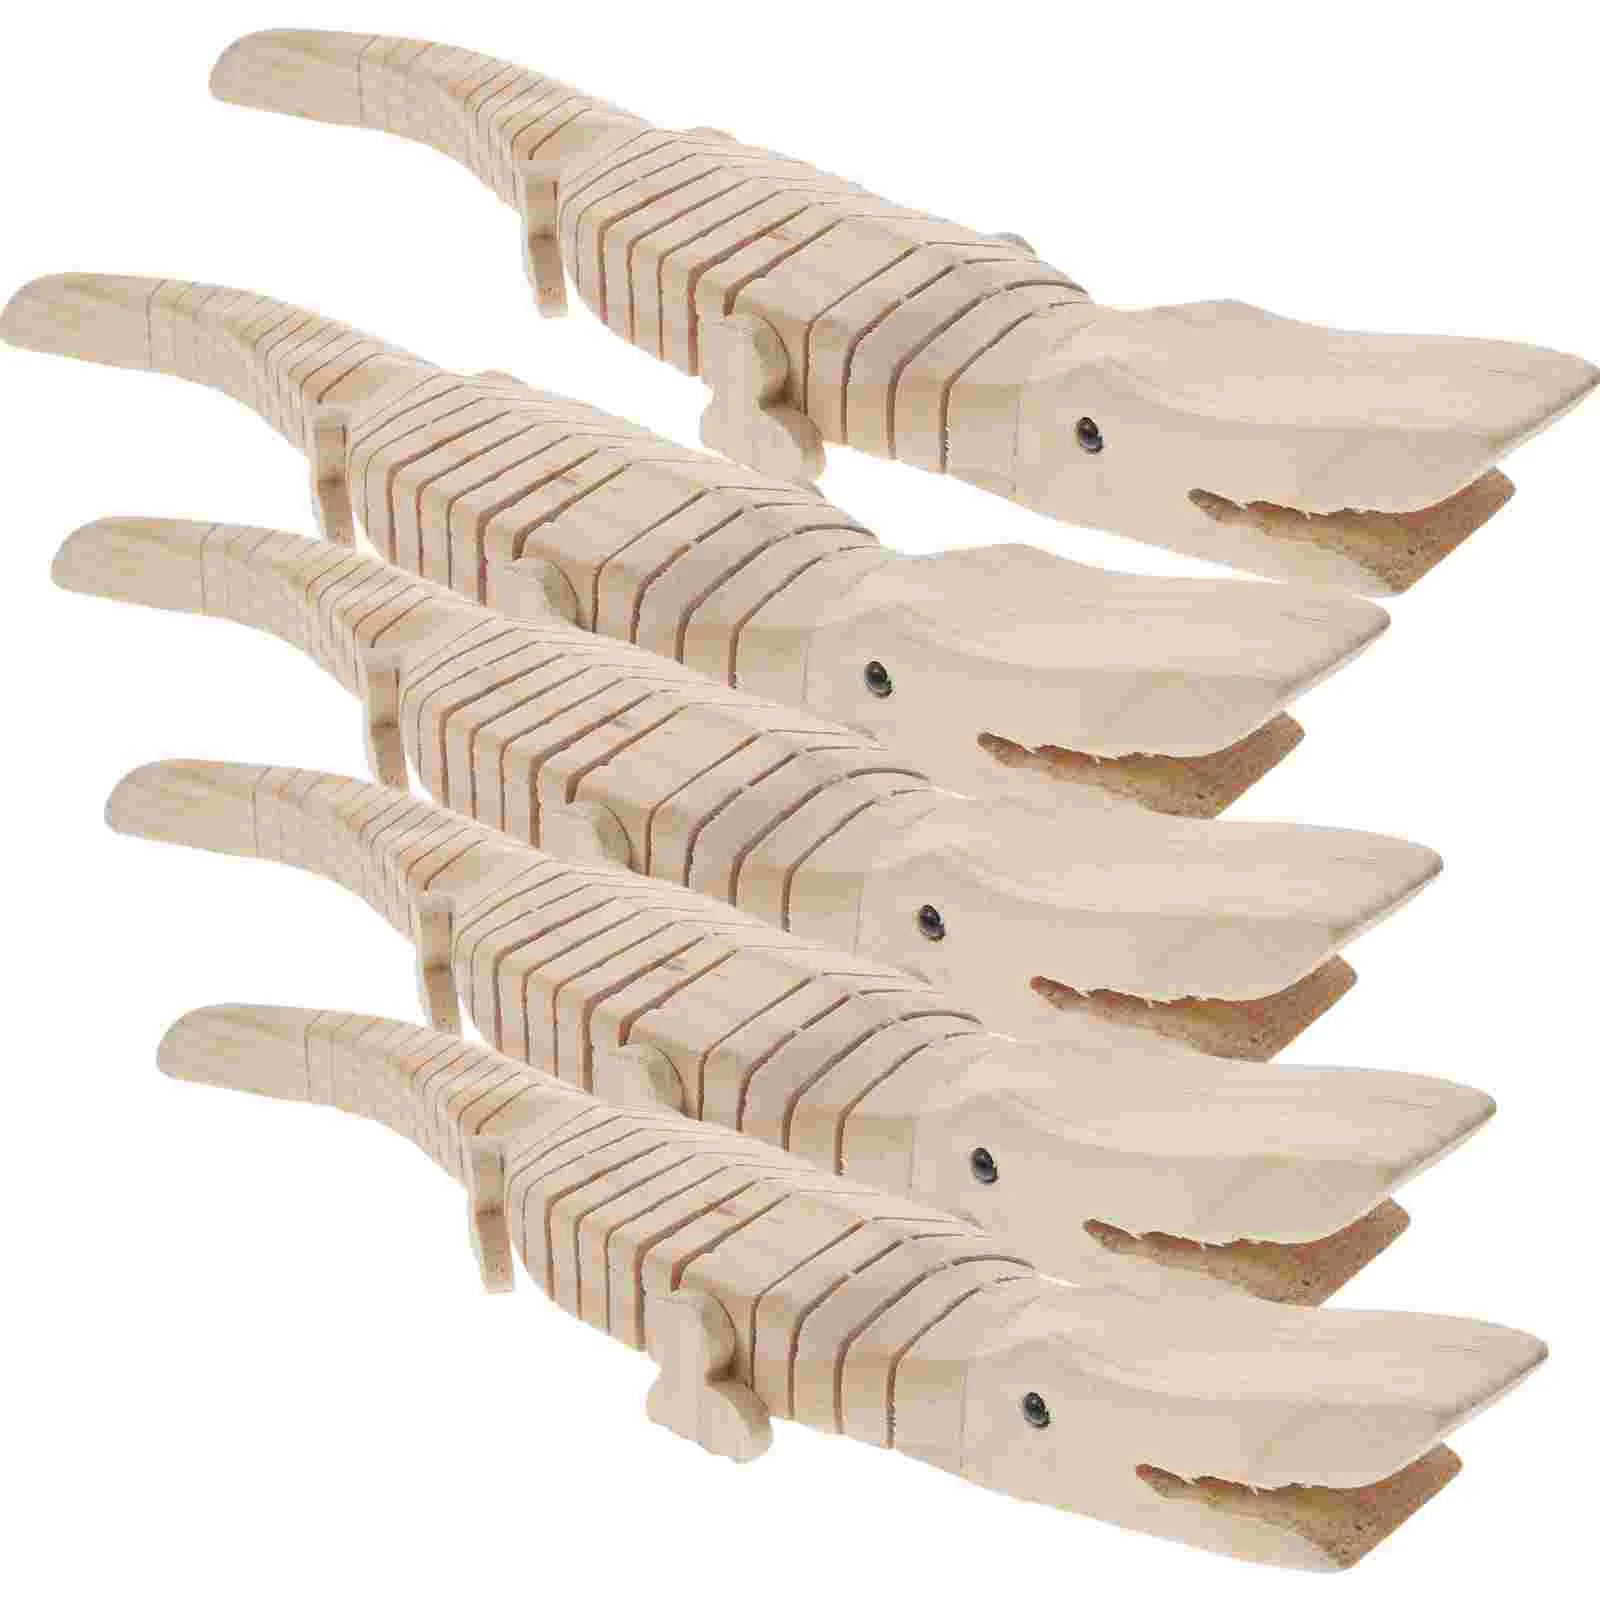 

5 Pcs Modeling Student Children's Toys Realistic Crocodile Plaything Wooden Wiggle Animal